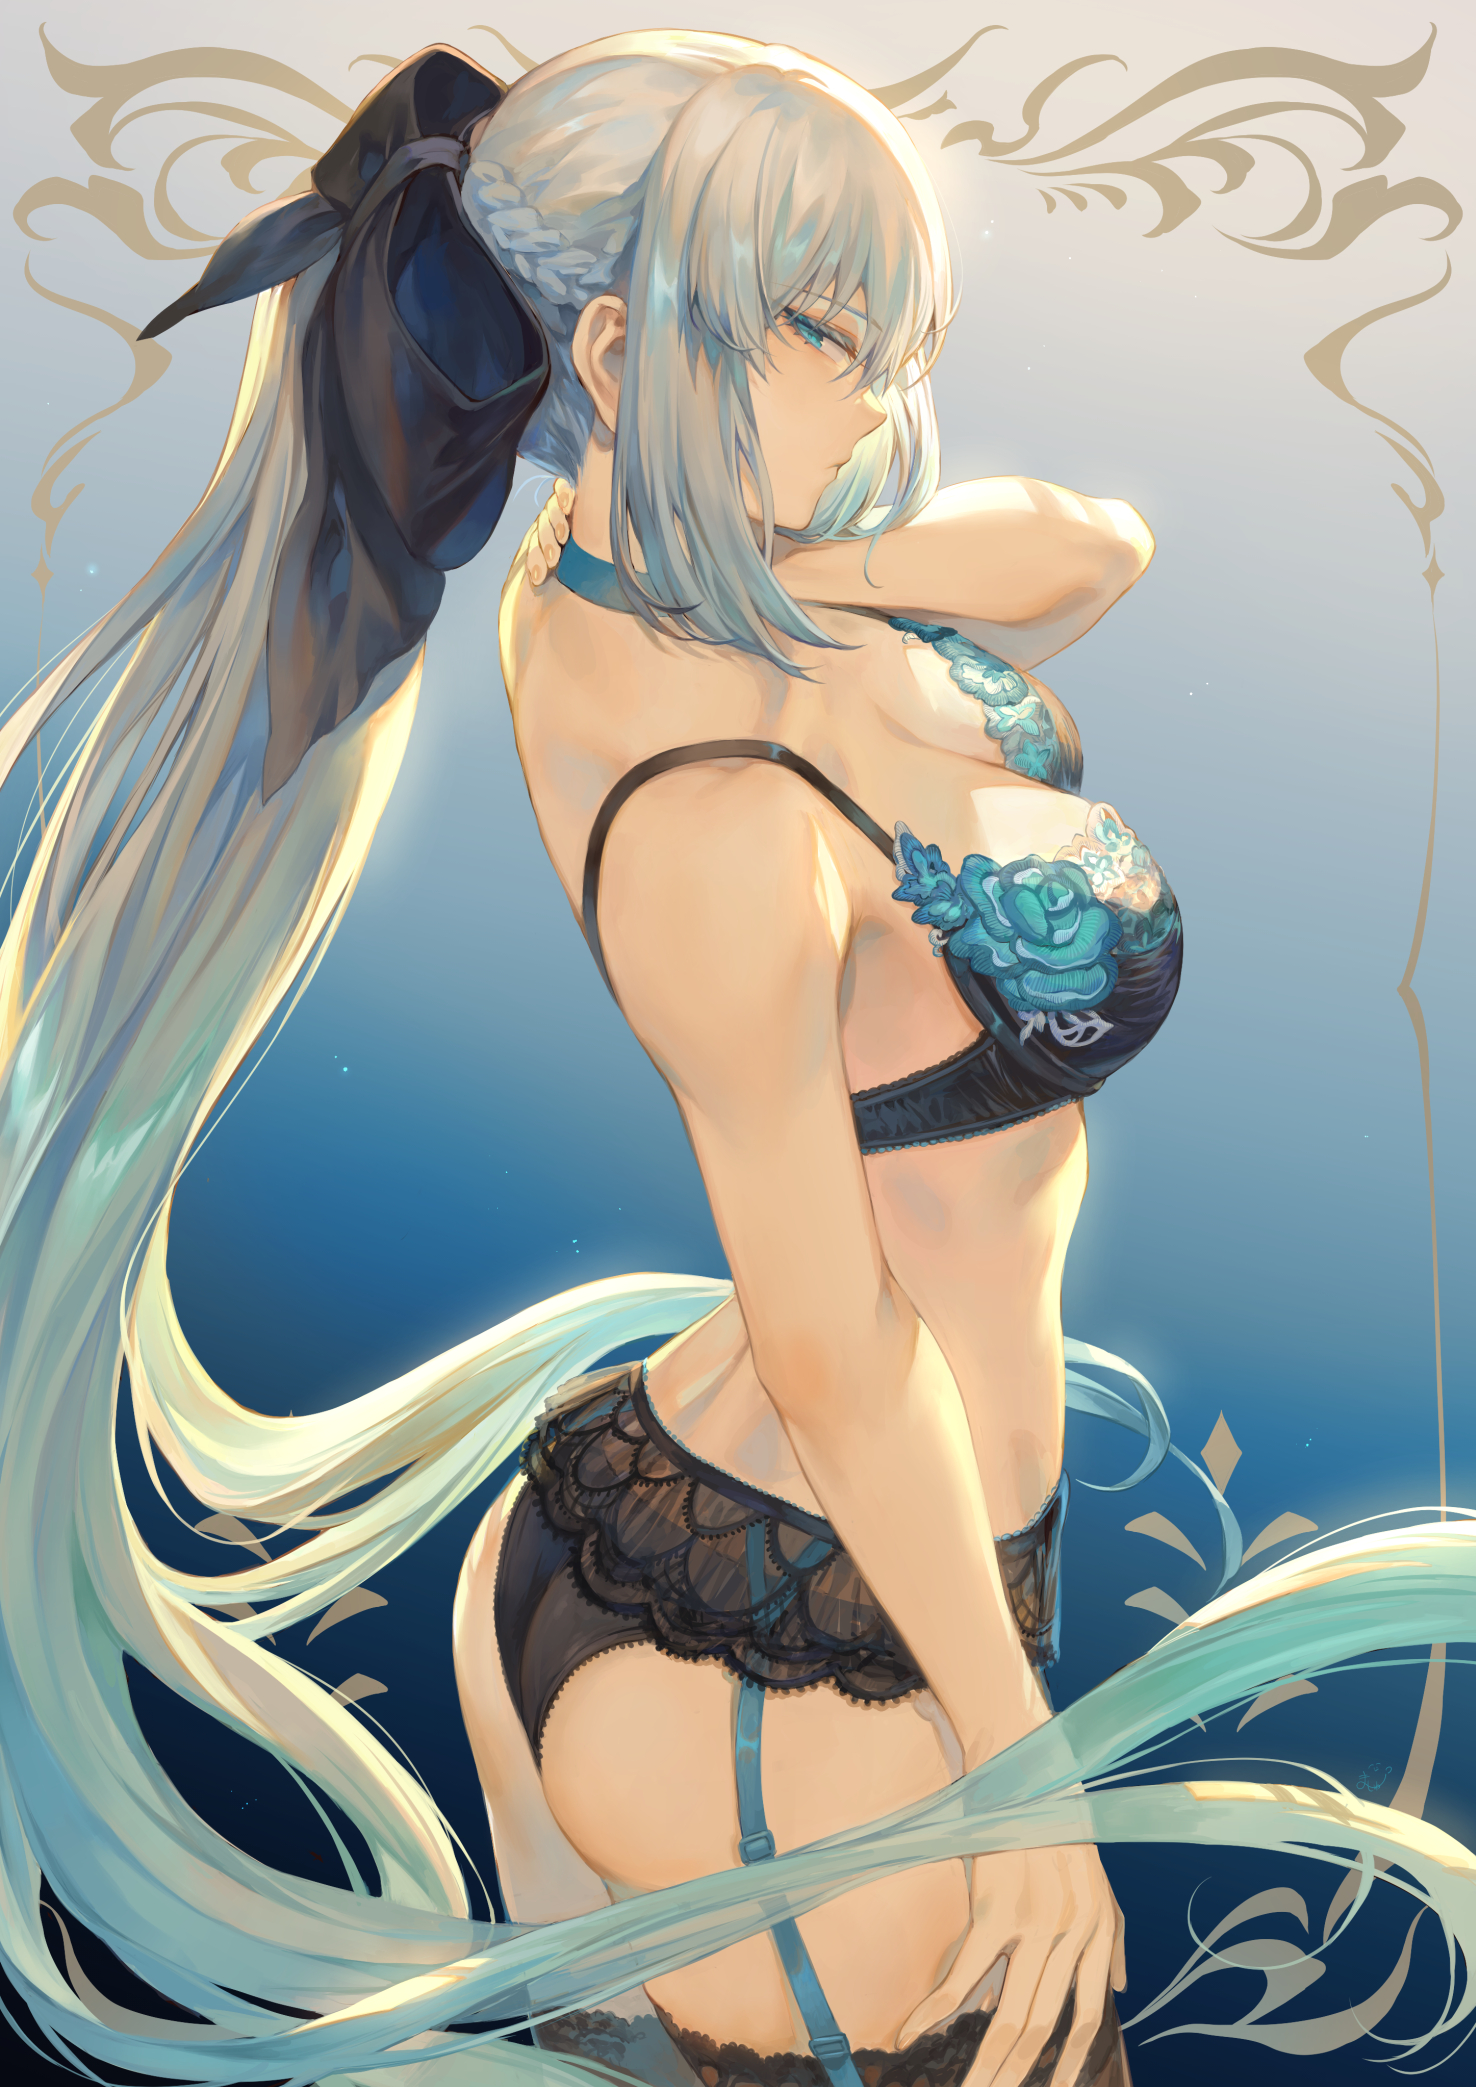 Anime 1476x2087 anime anime girls lingerie ass long hair garter belt cleavage Mashu 003 artwork Morgan le Fay Fate/Grand Order solo Fate series digital art looking at viewer ponytail big boobs blue eyes fan art simple background garter straps stockings white hair